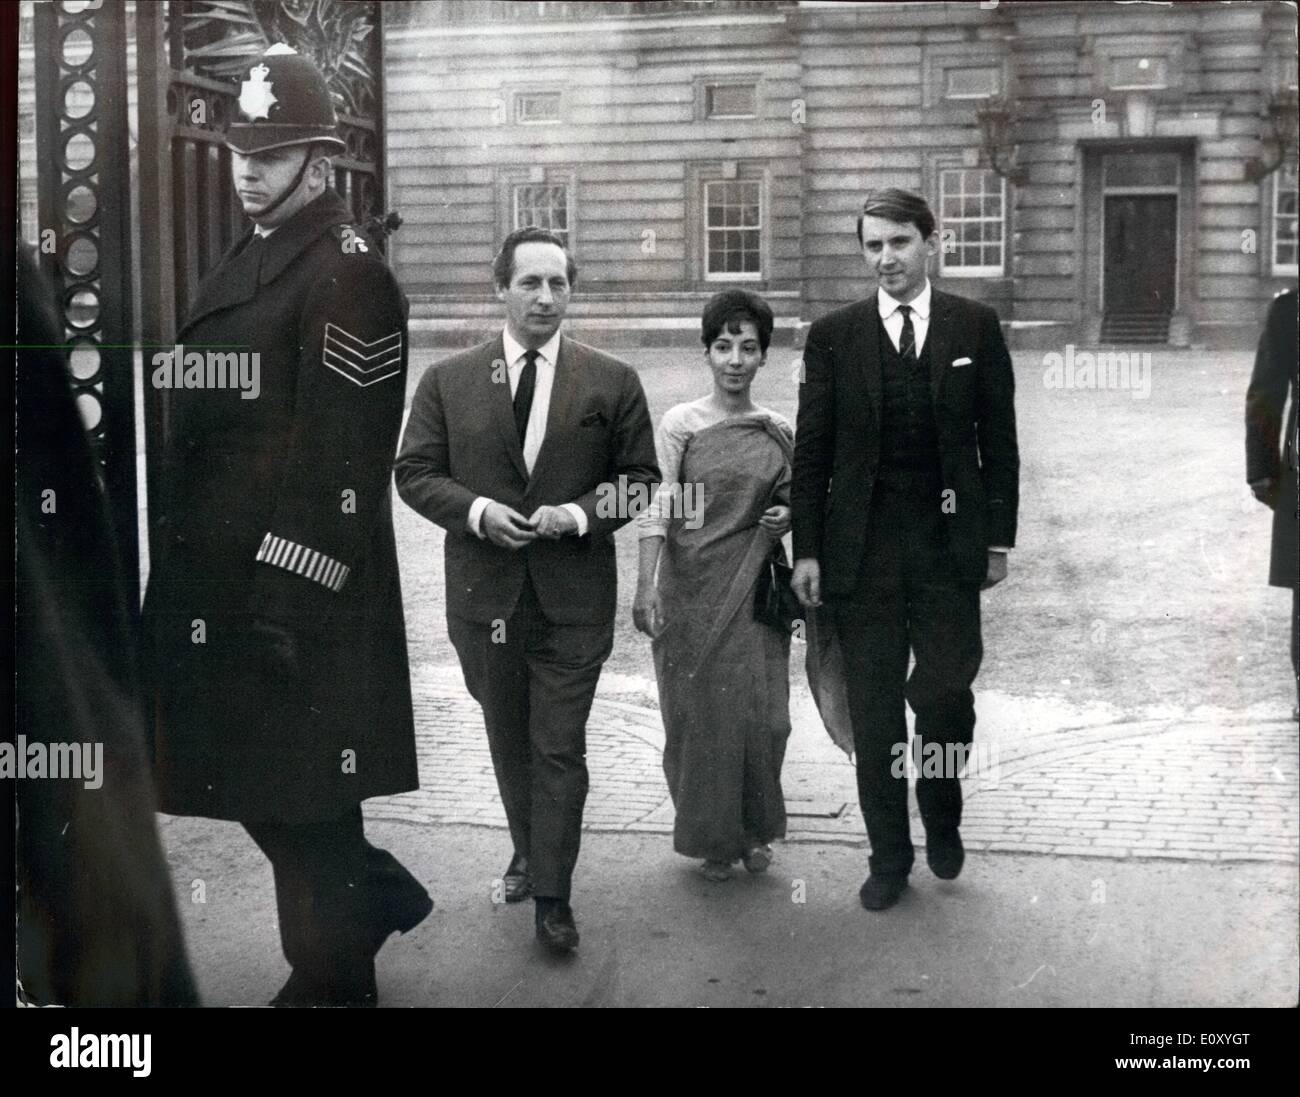 Feb. 02, 1968 - Immigrant Bill Letter Handed in at Buckingham Palace. A deputation led by Mr. David Steel, MP, Liberal spokesman in the Common on Commonwealth Affairs, this afternoon handed in a letter asking the Queen as Head of the Commonwealth and Head of State in Britain, to refuse Royal Assent to the Commonwealth Immigrants Bill after its passage through Parliament. Keystone Photo Shows:- Seen leaving the Palace after handing in the letter today are (L to R): Dr. Maurice Miller, Labour M.P. for Kelvin Grove, Glasgow; Mrs Stock Photo